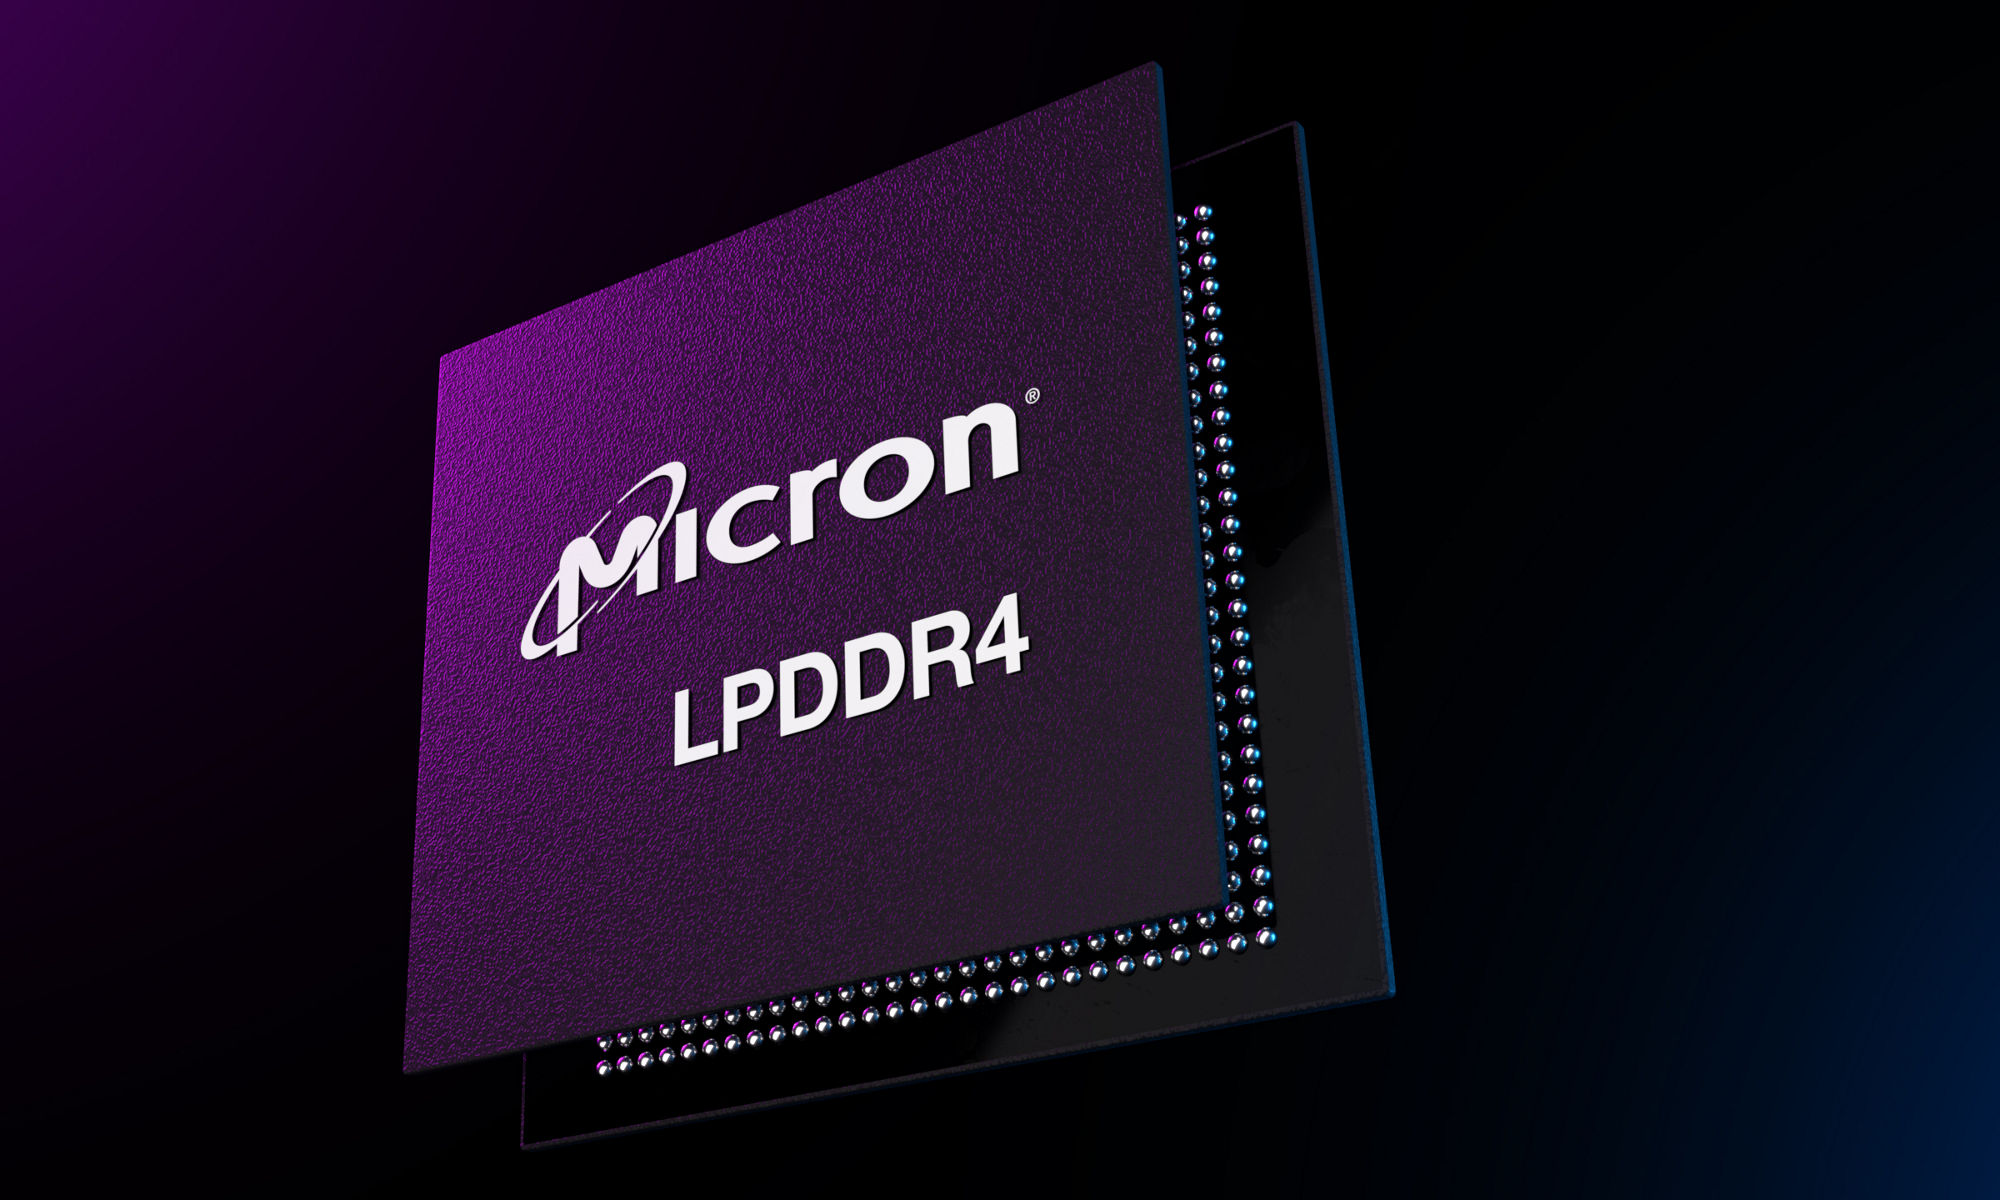 Product image LPDDR4 in purple and black hues